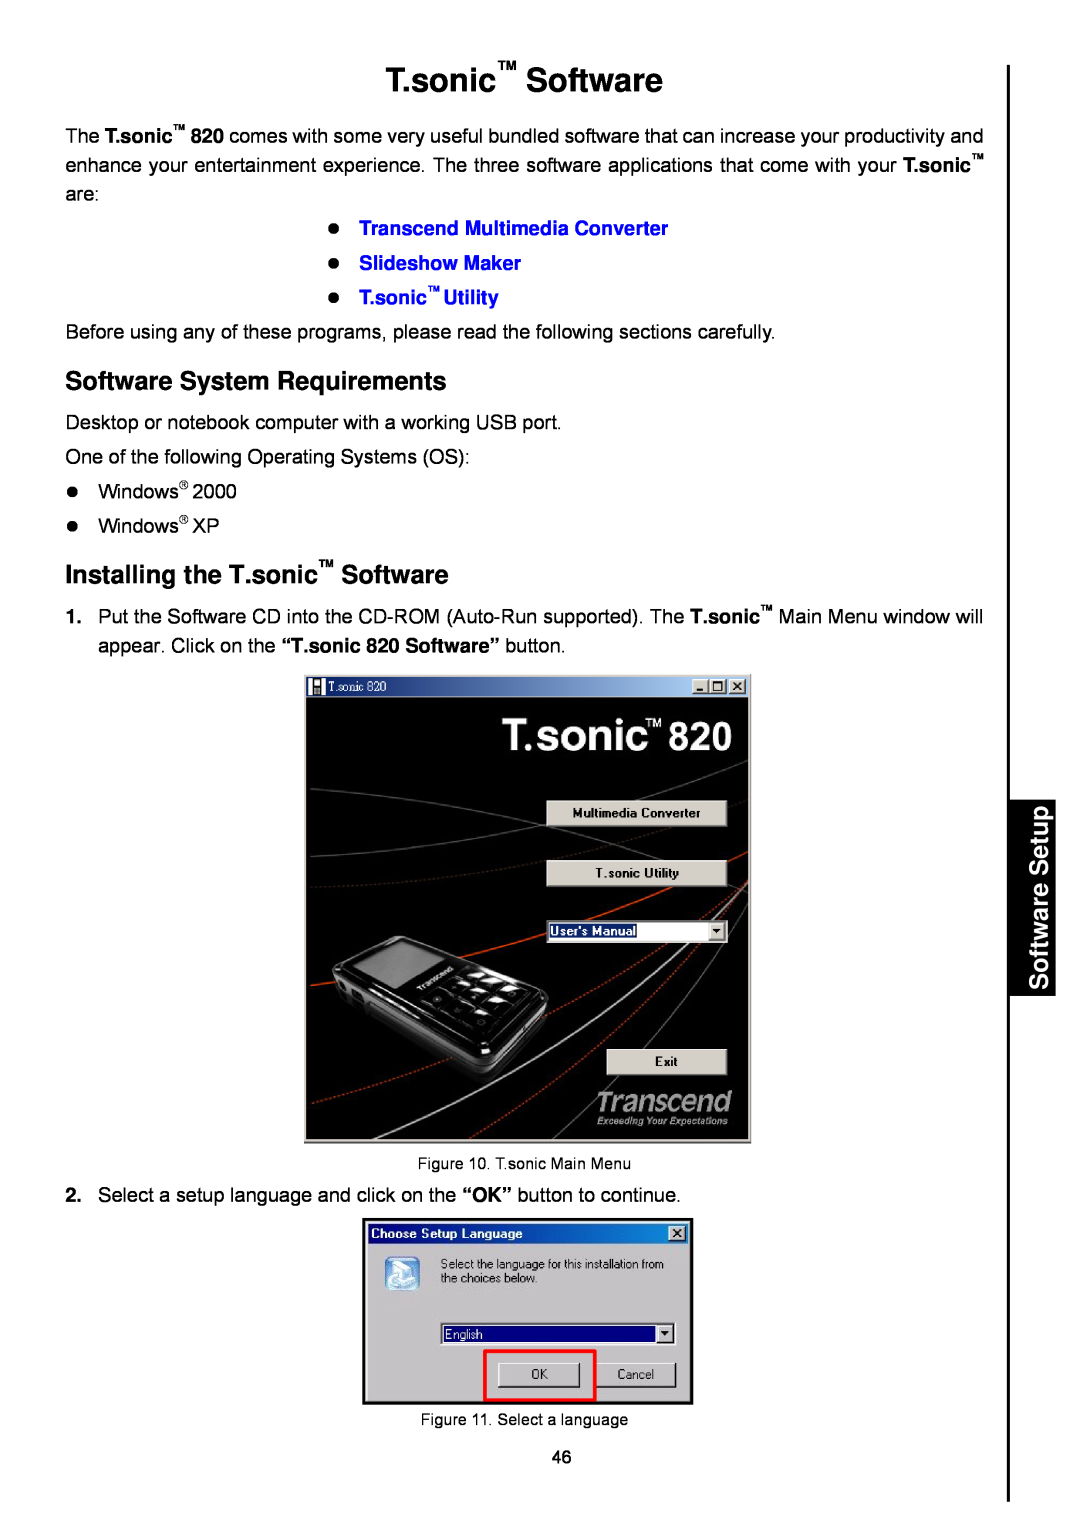 Transcend Information 820 user manual Software Setup, Software System Requirements, Installing the T.sonic Software 